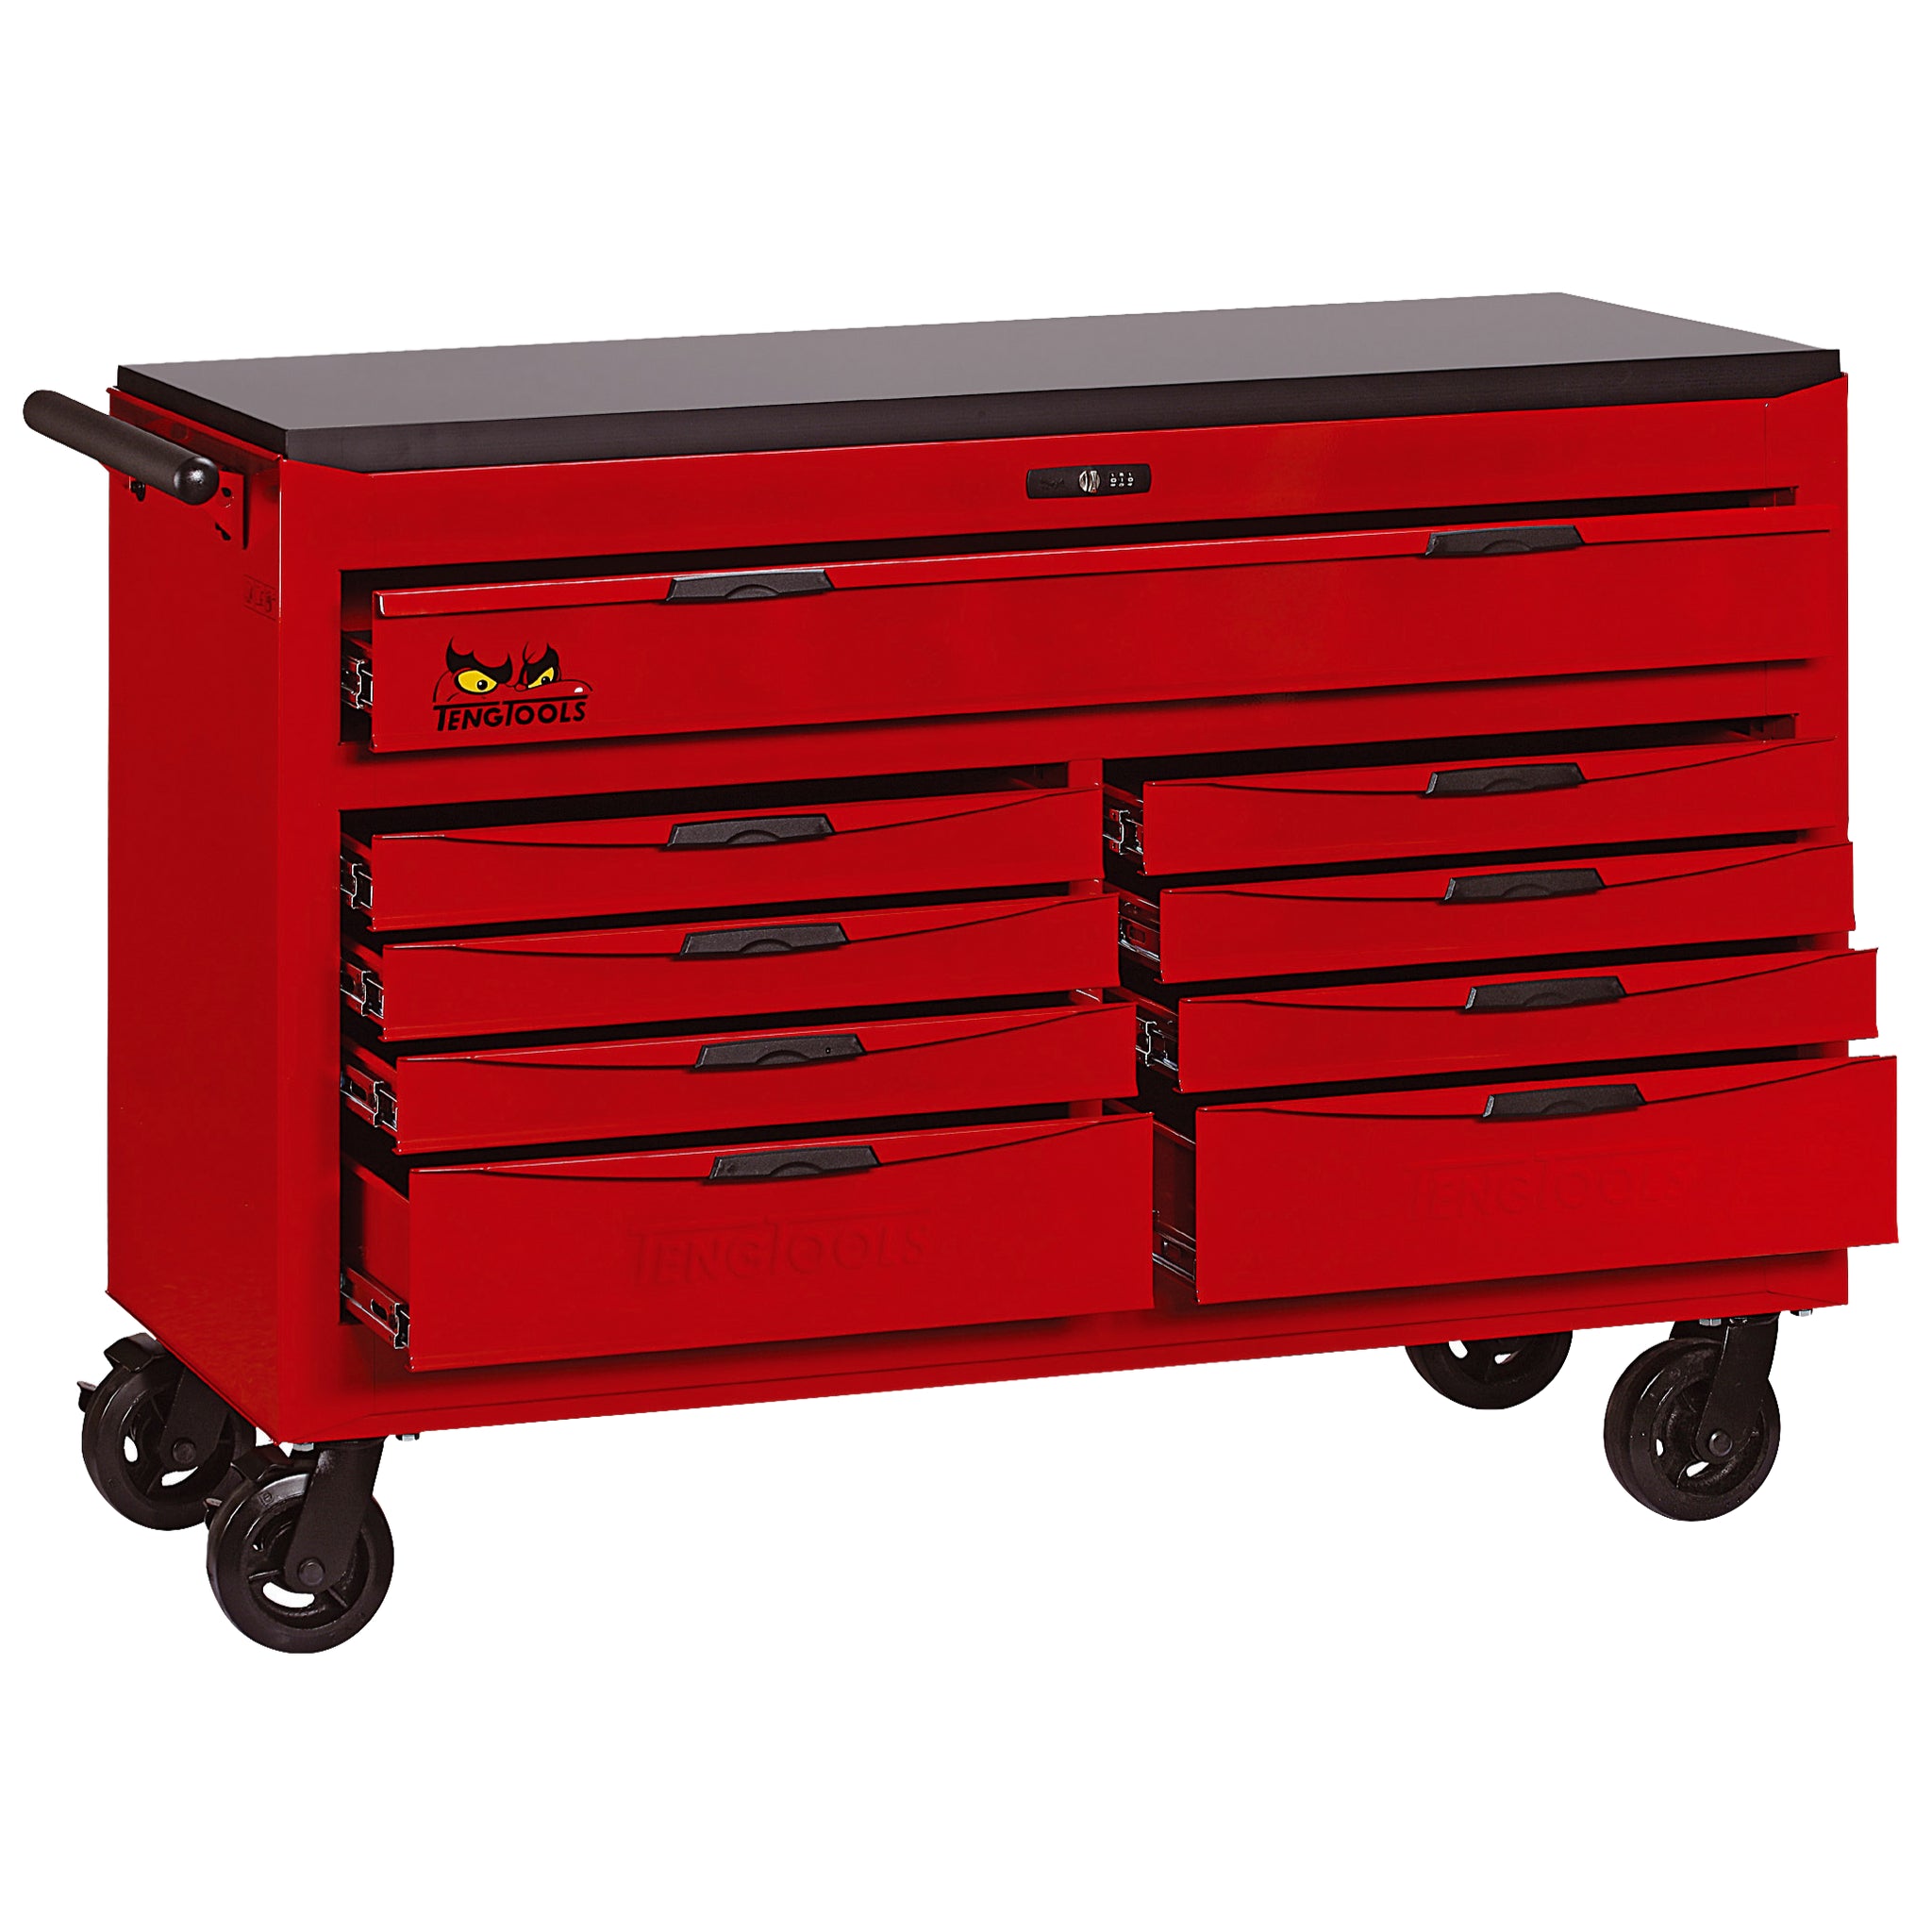 Teng Tools 53 Inch Wide 9 Drawer Heavy Duty Roller Cabinet Tool Chest / Wagon - TCW809N